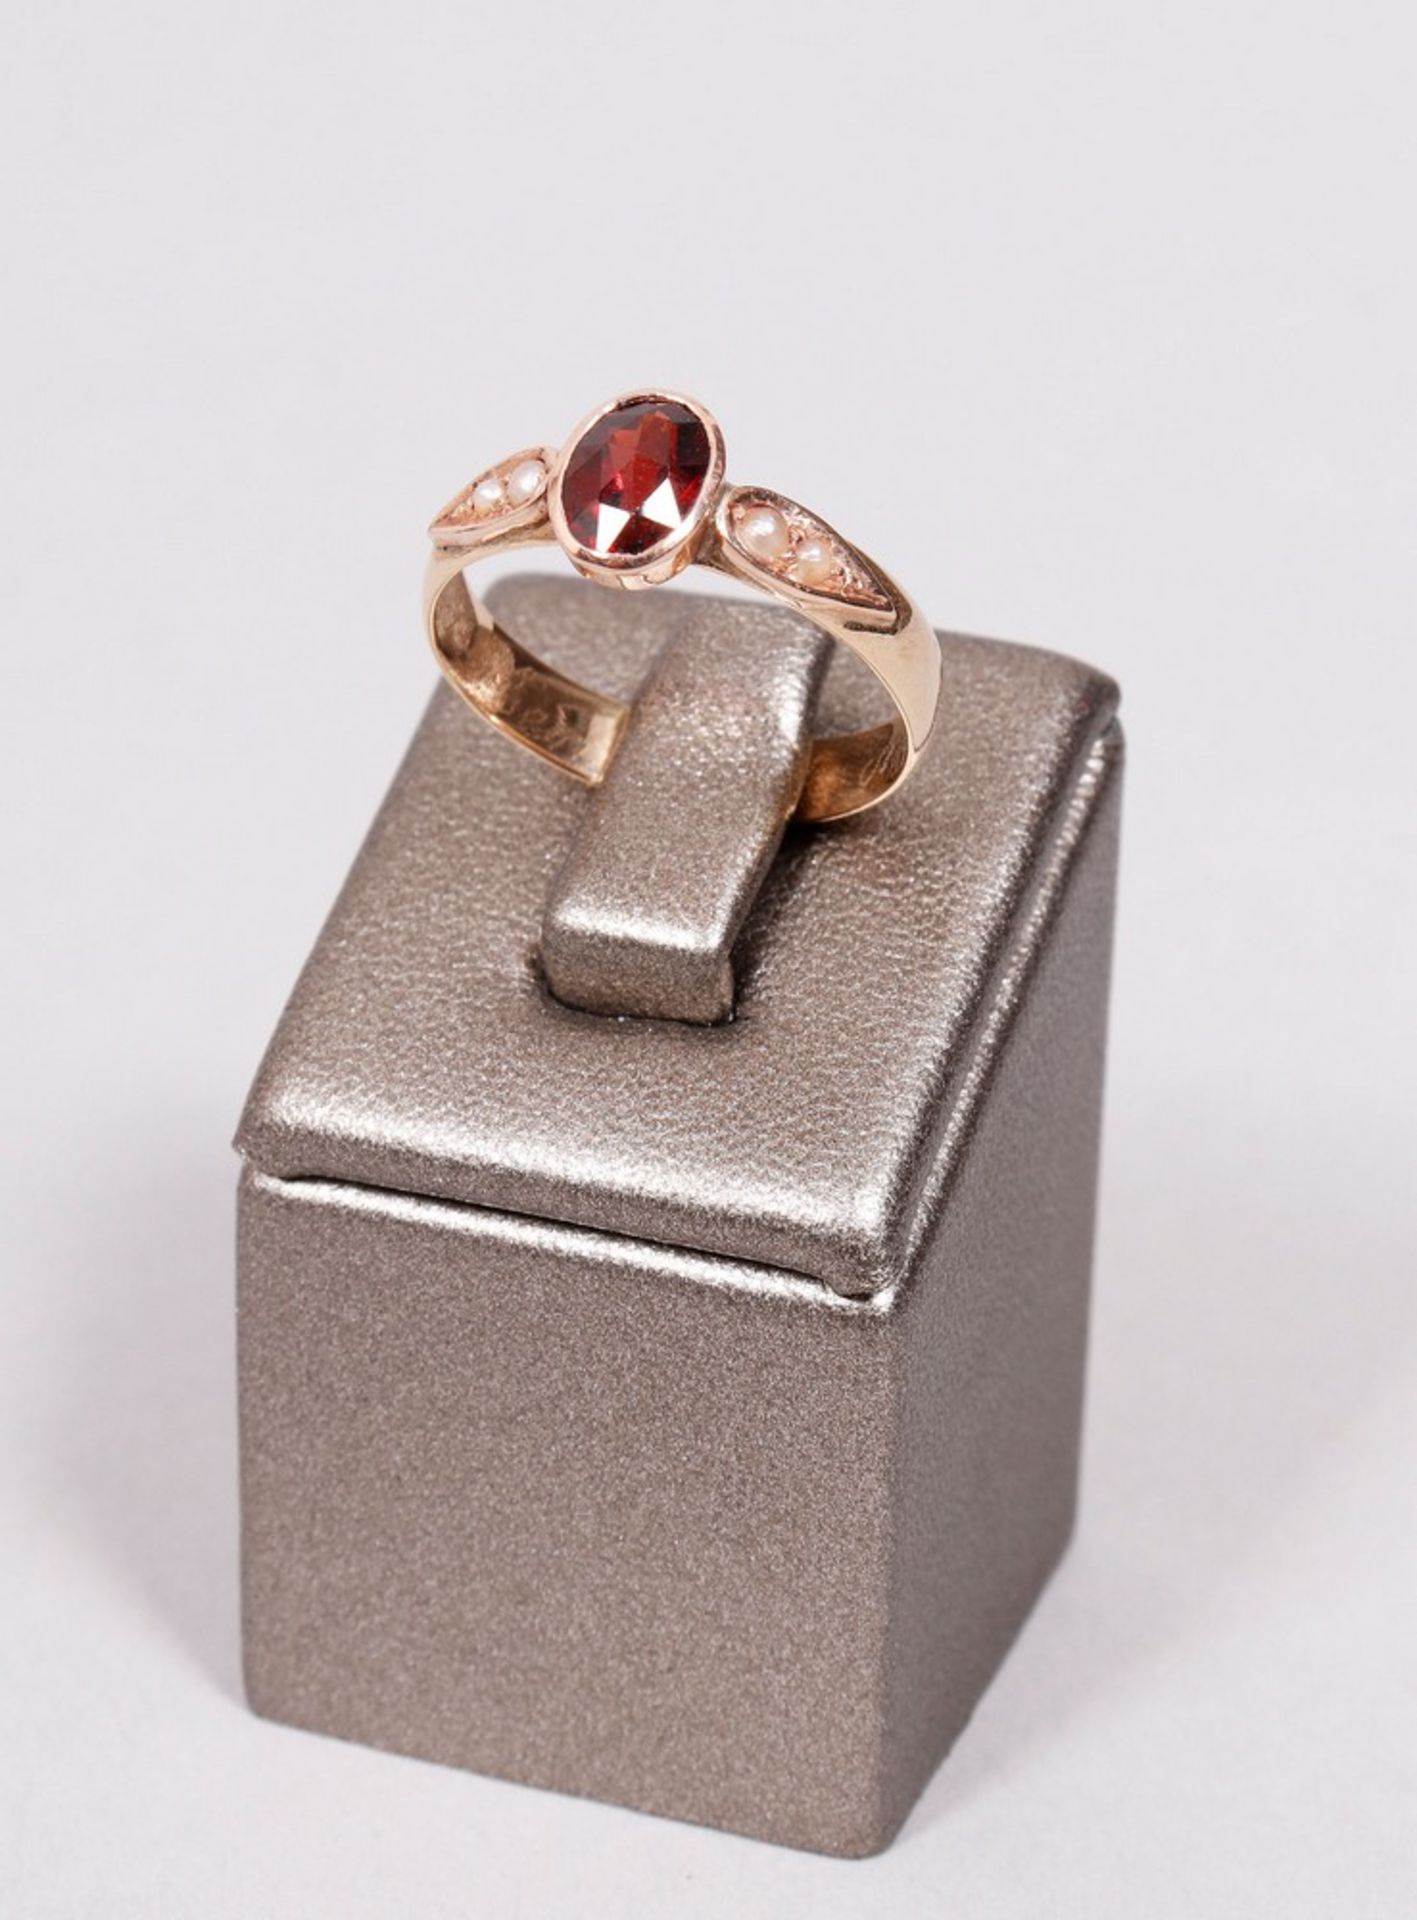 Ring, 585 red gold, set with an oval garnet stone